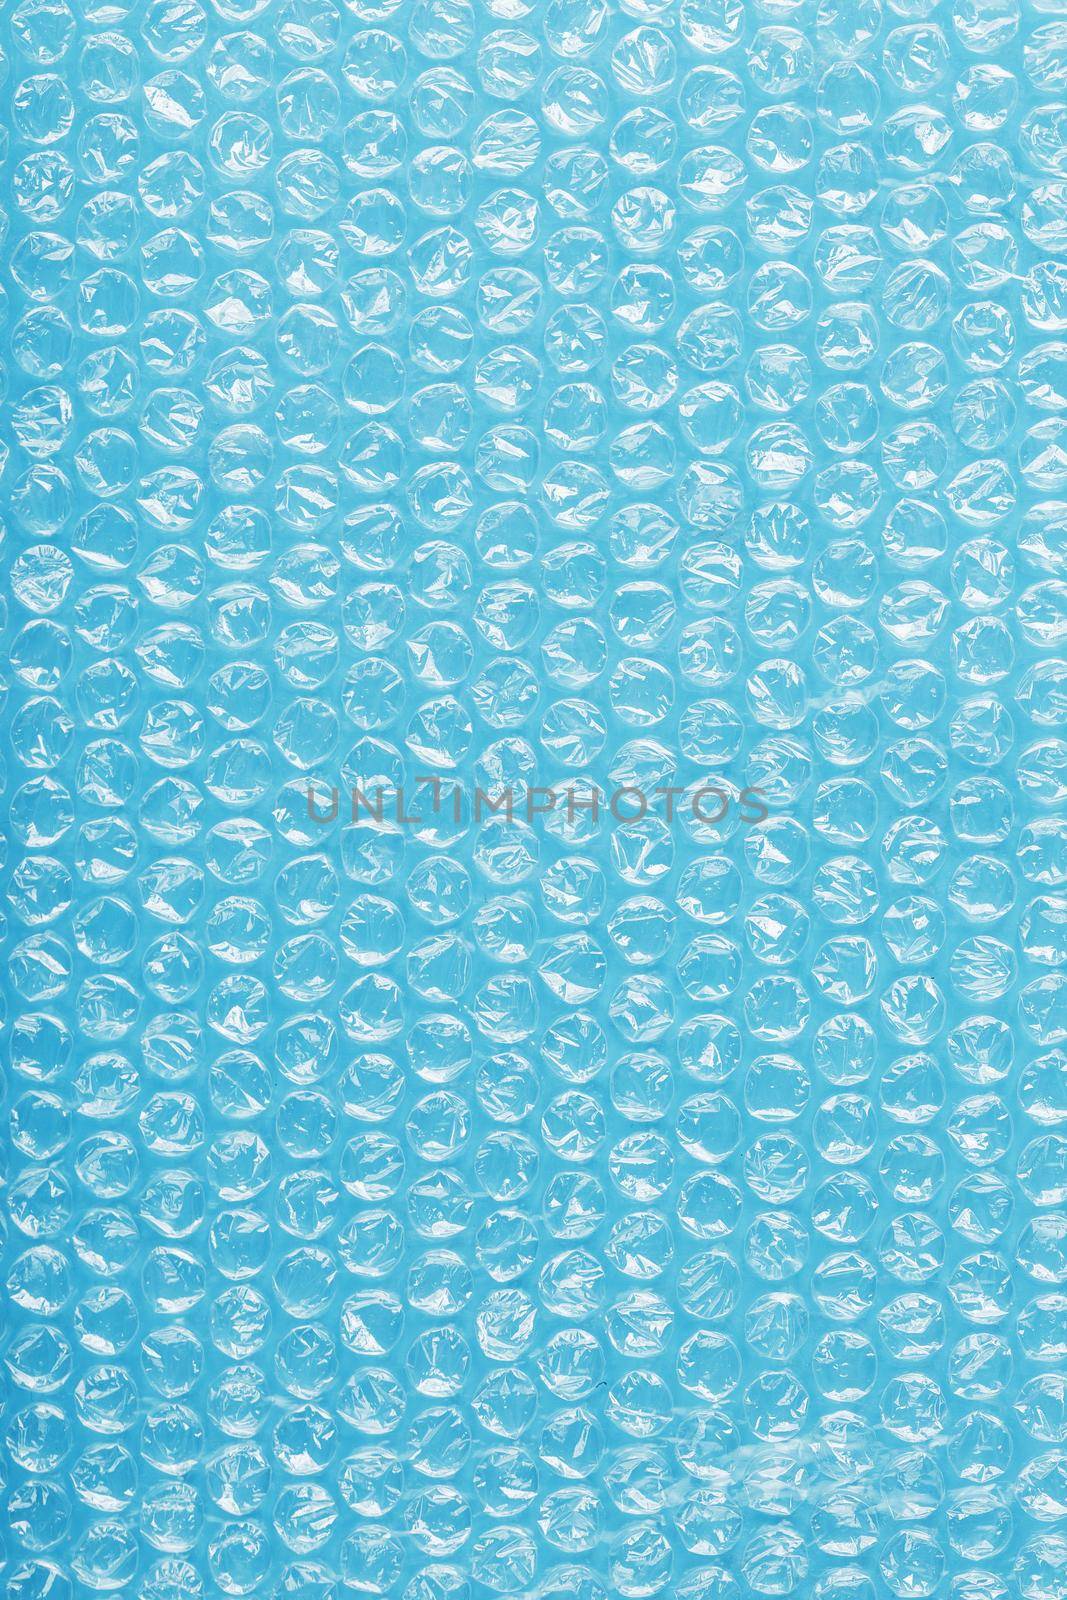 Packing bubble wrap for parcels on a blue background in full screen by AlexGrec